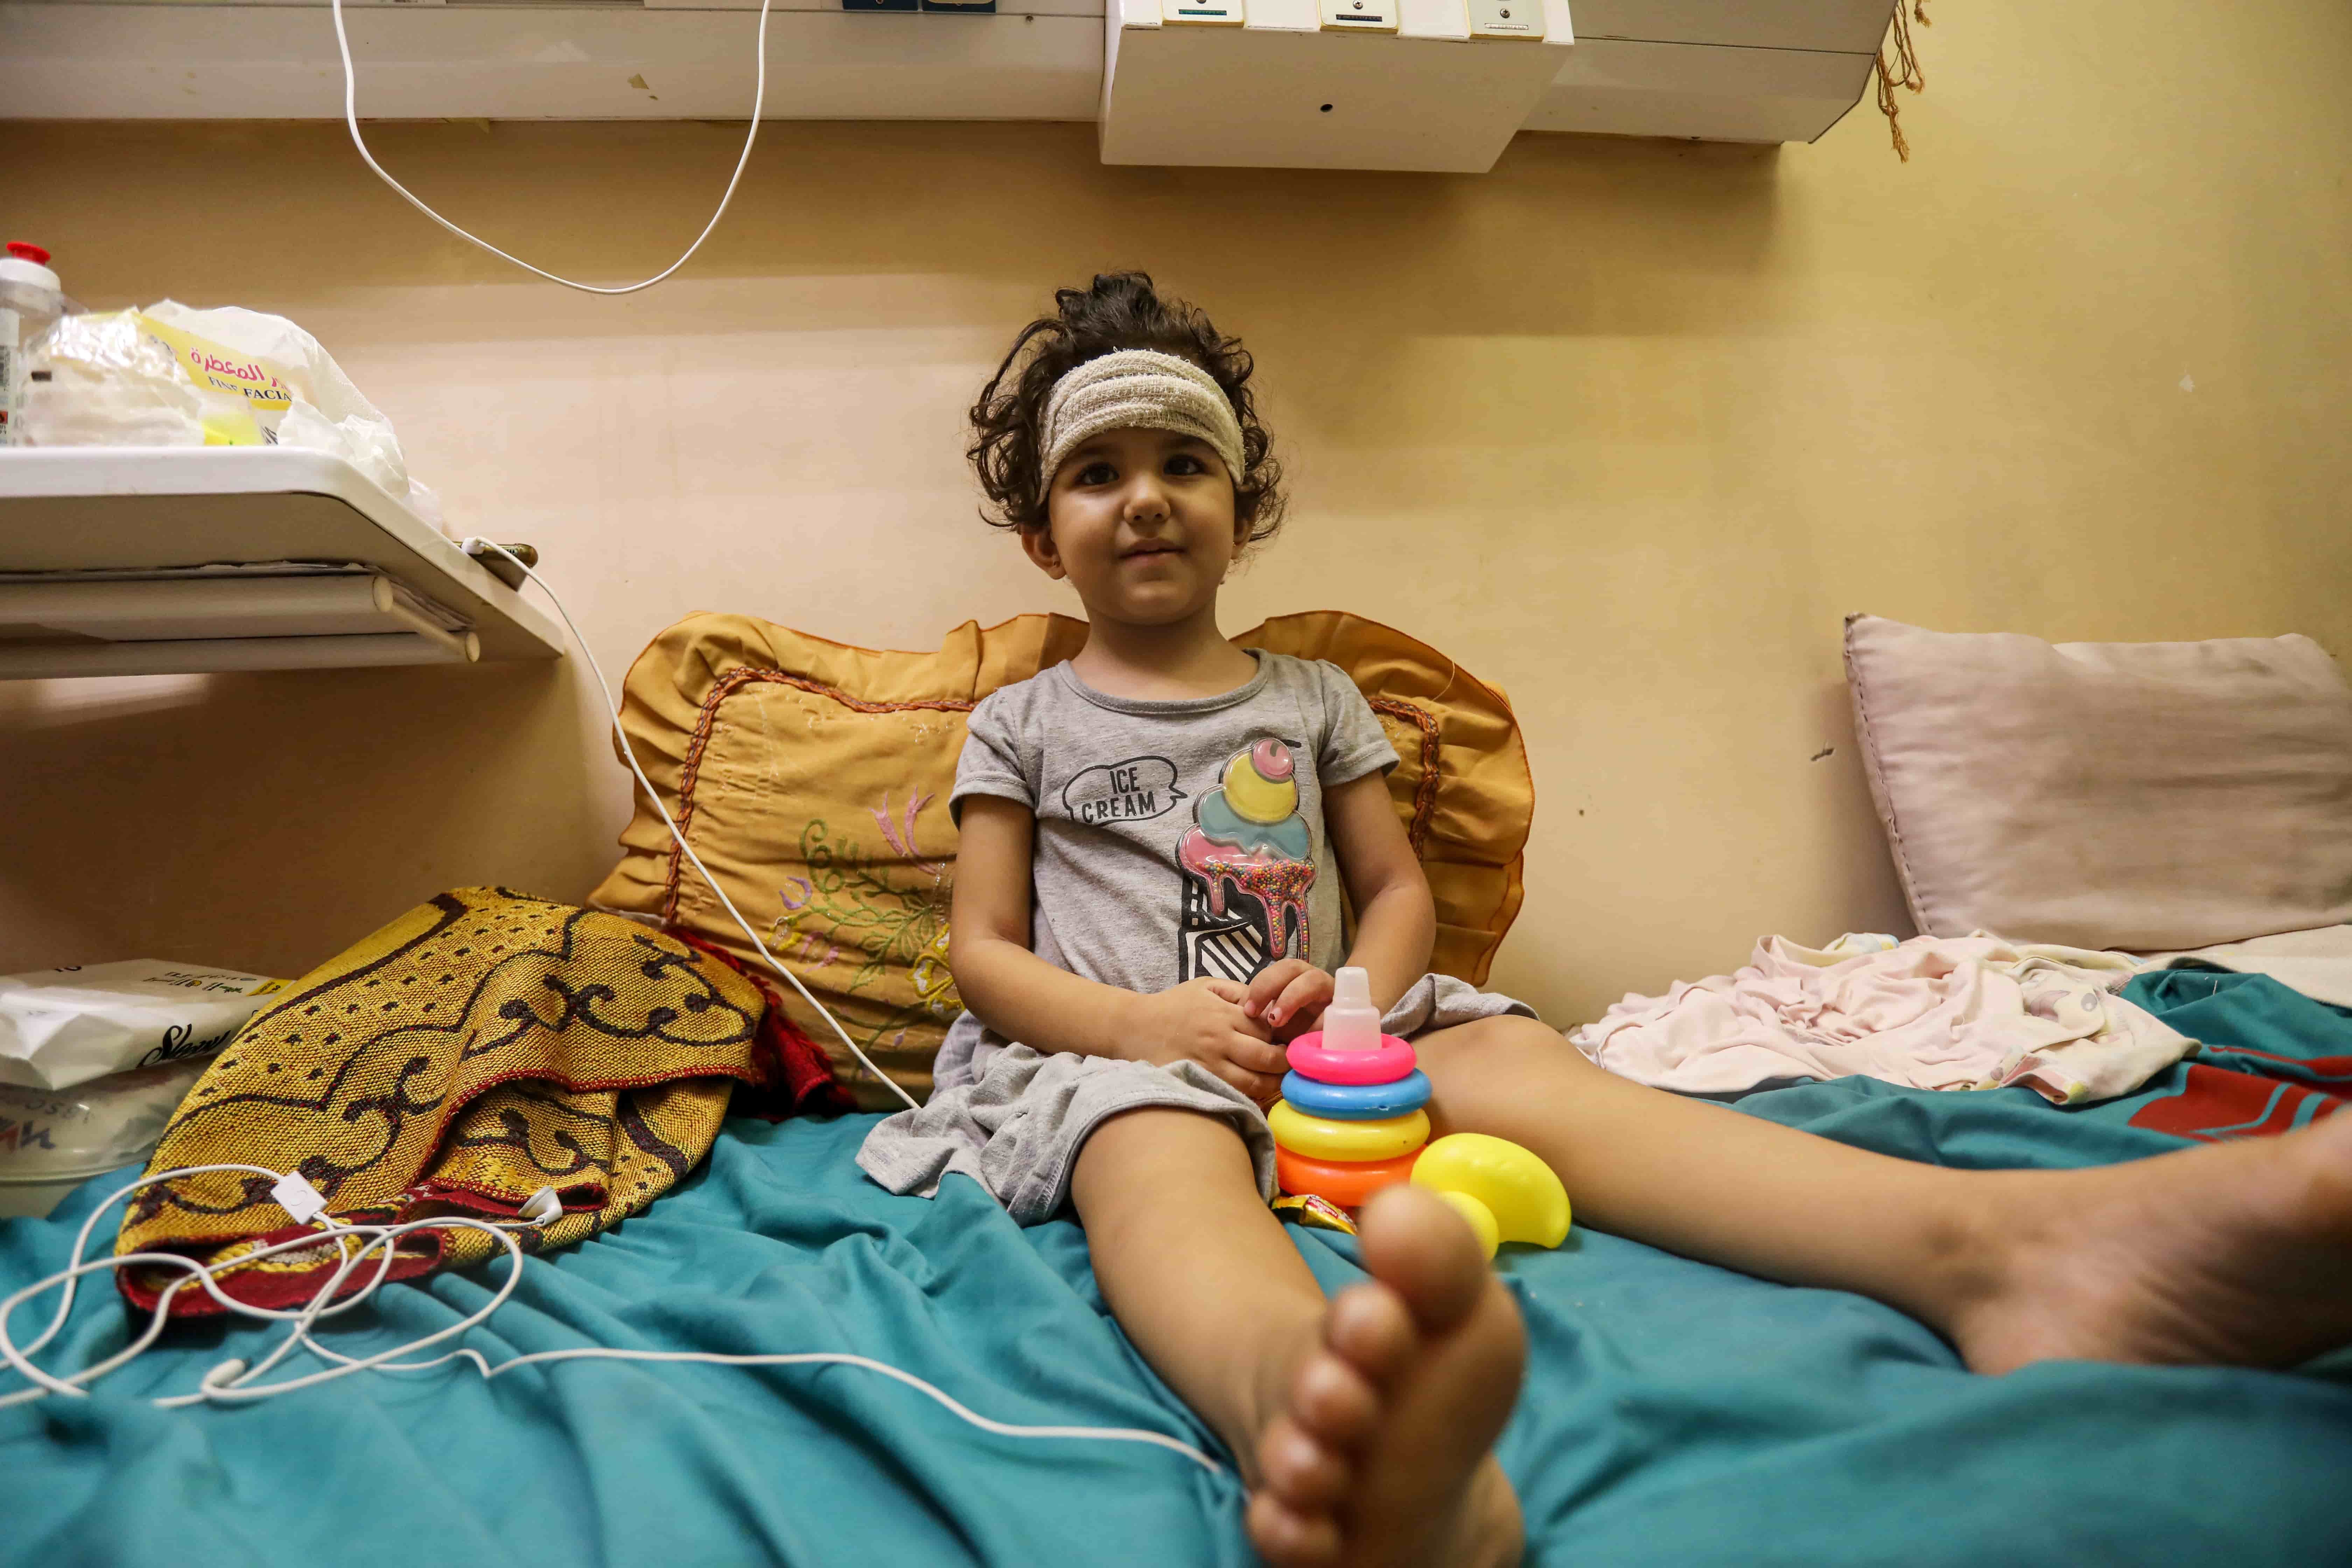 Jude al-Sharif spent a day in a coma after she was wounded by shrapnel that hit her head. Israeli warplanes had targeted the car next to her family while they were attempting to flee south in the Gaza Strip. [Abdelhakim Abu Riash/Al Jazeera]